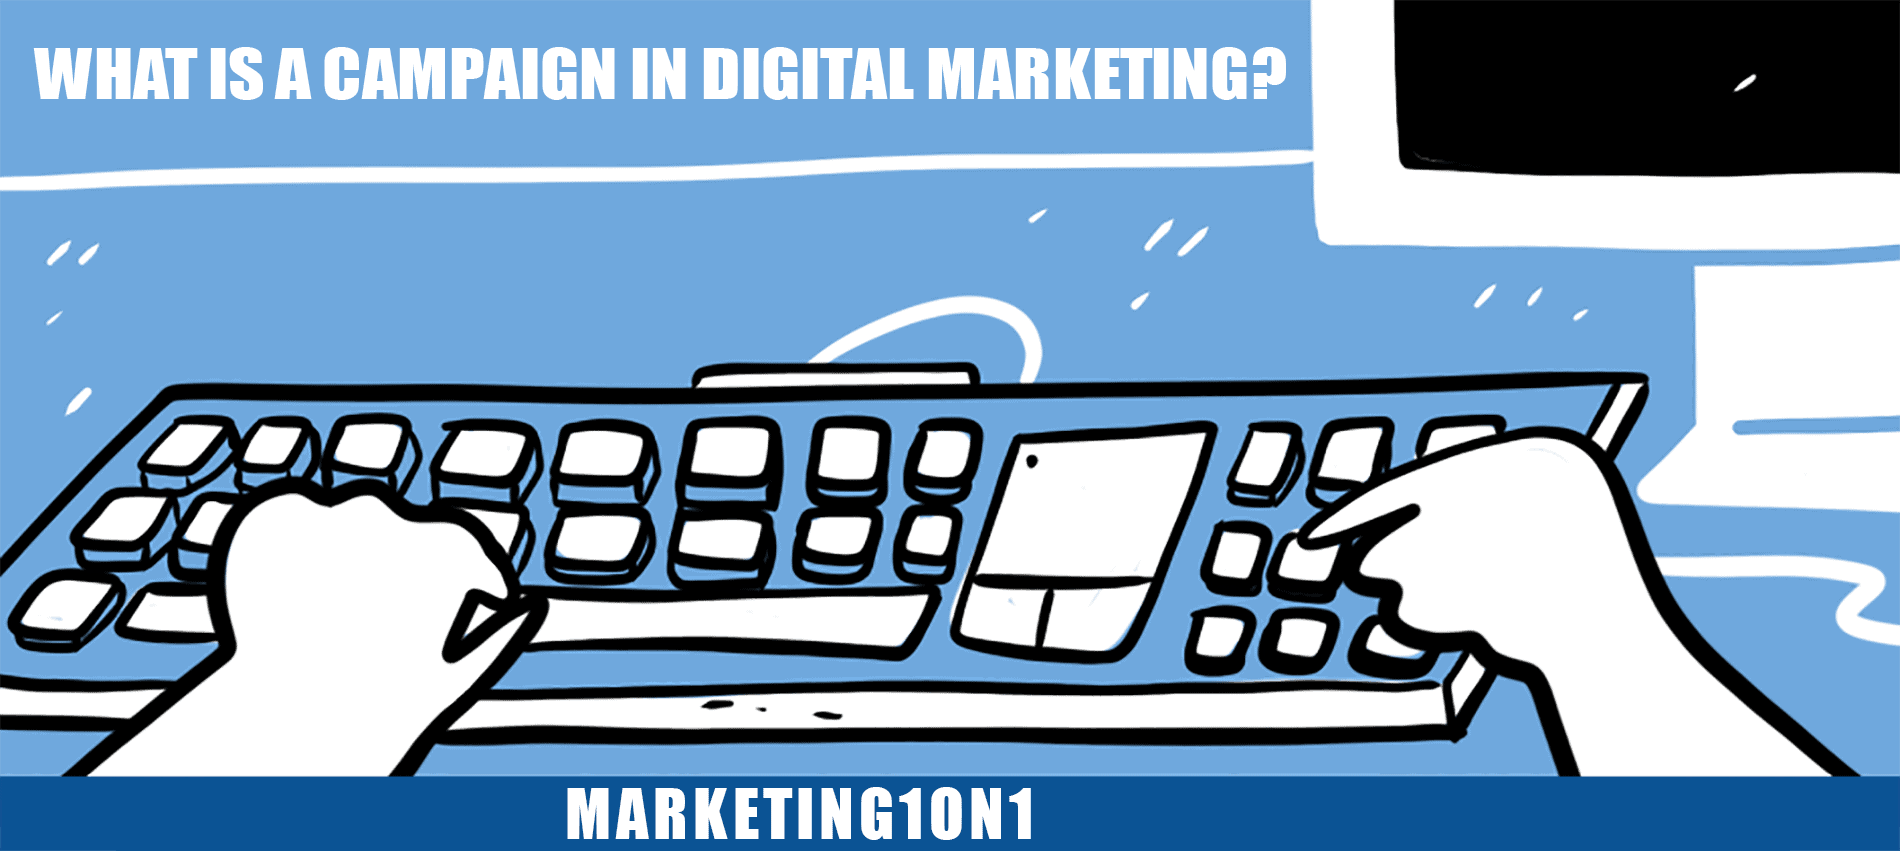 What is a campaign in digital marketing?